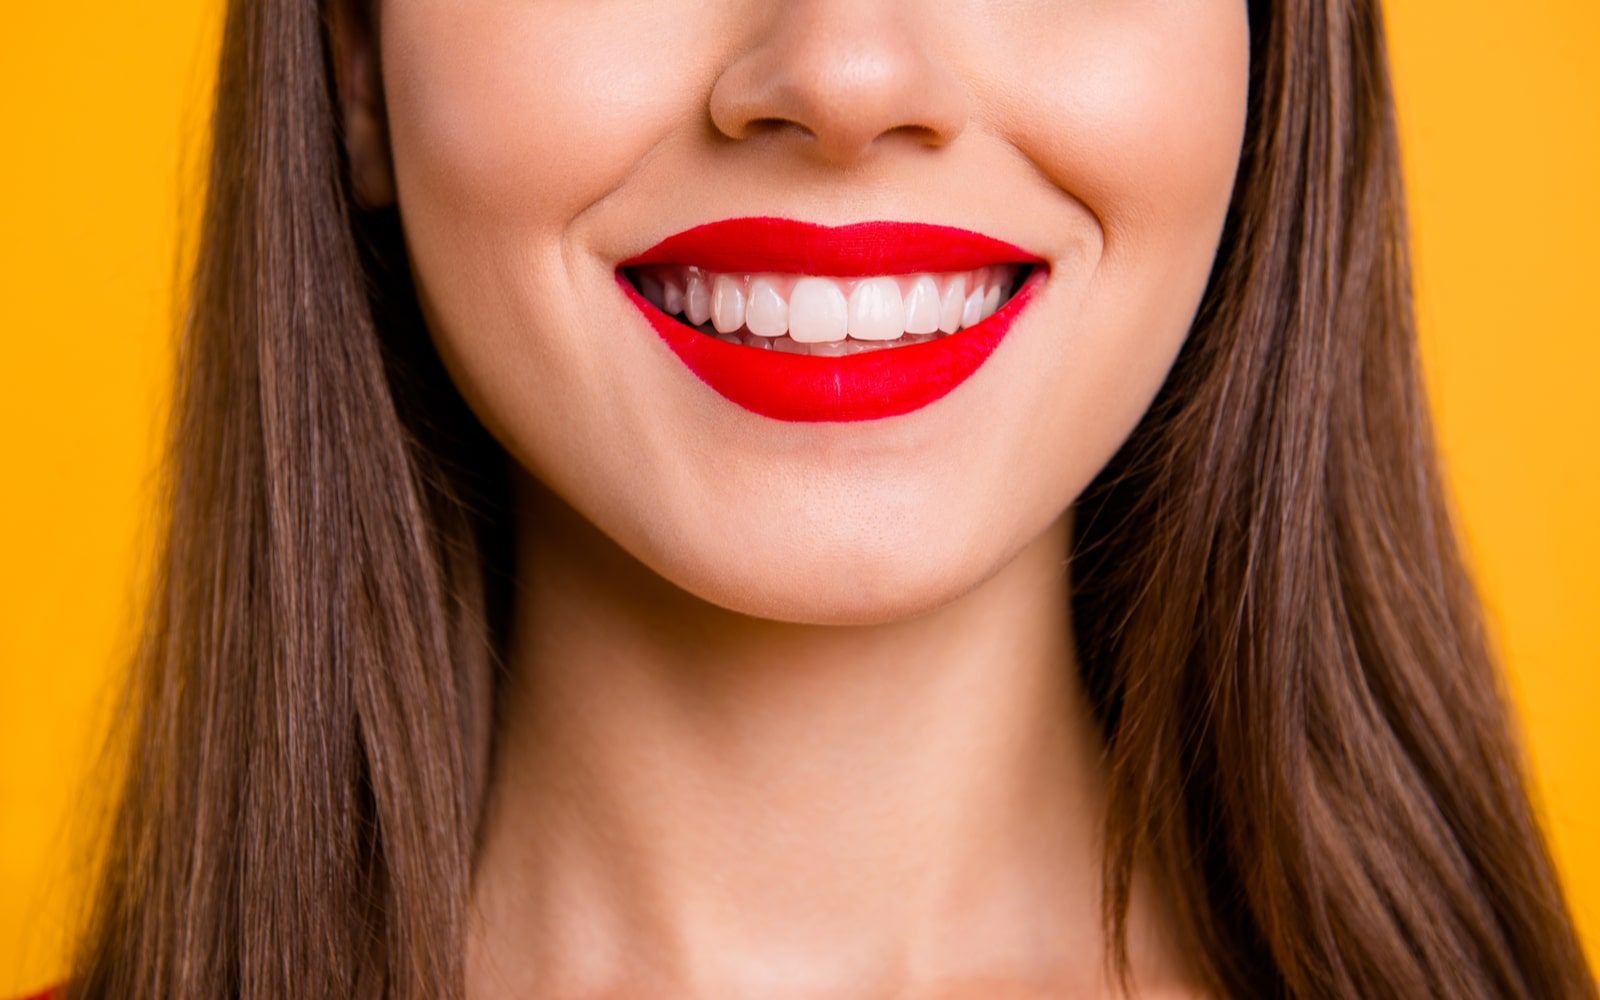 Woman With Healthy Gums Smiling Up Close